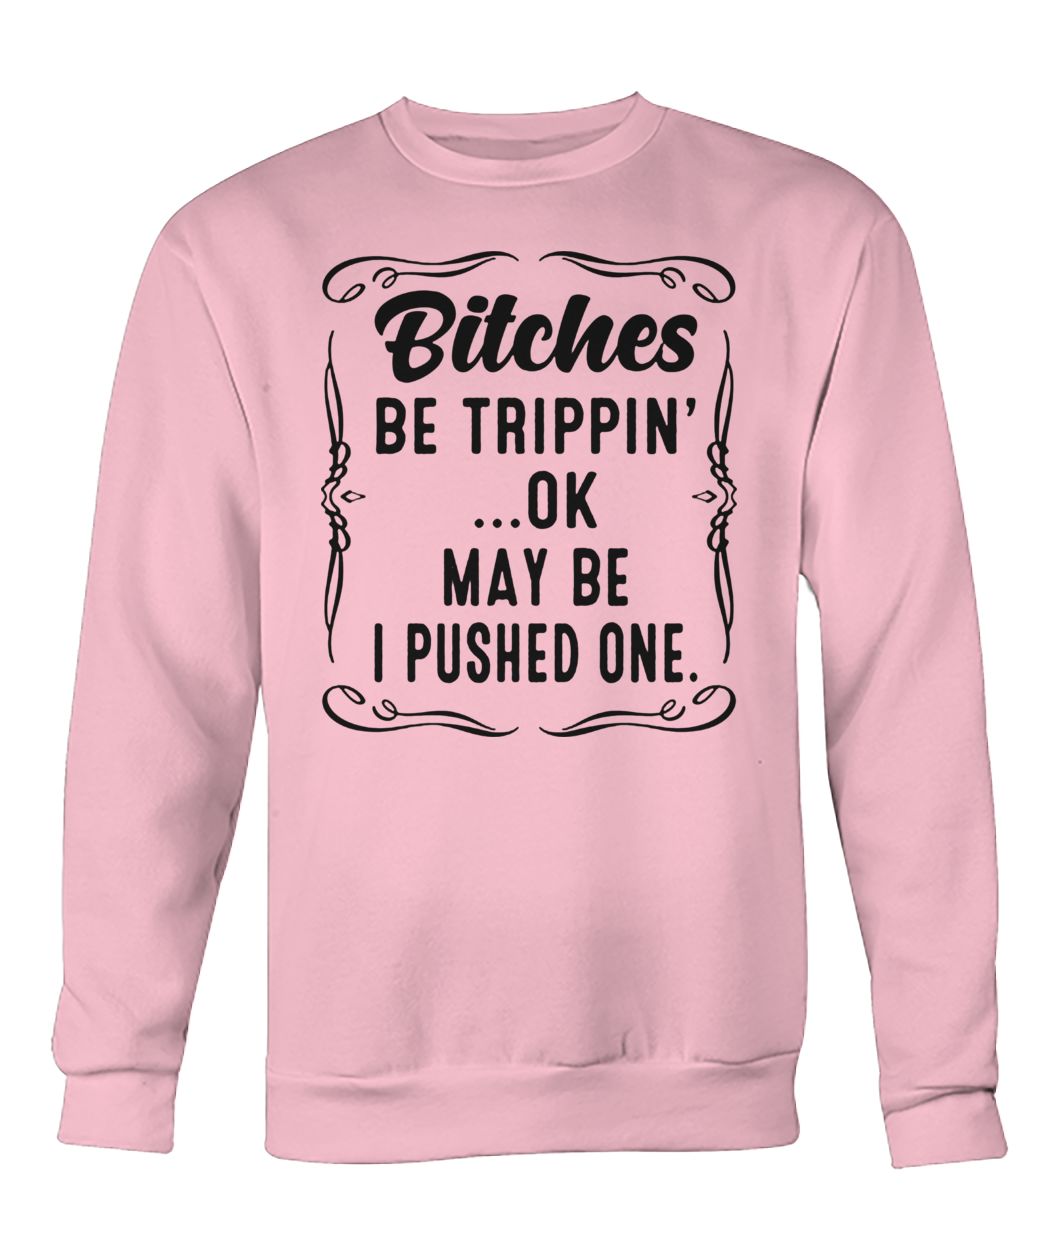 Bitches be trippin' maybe I pushed one crew neck sweatshirt